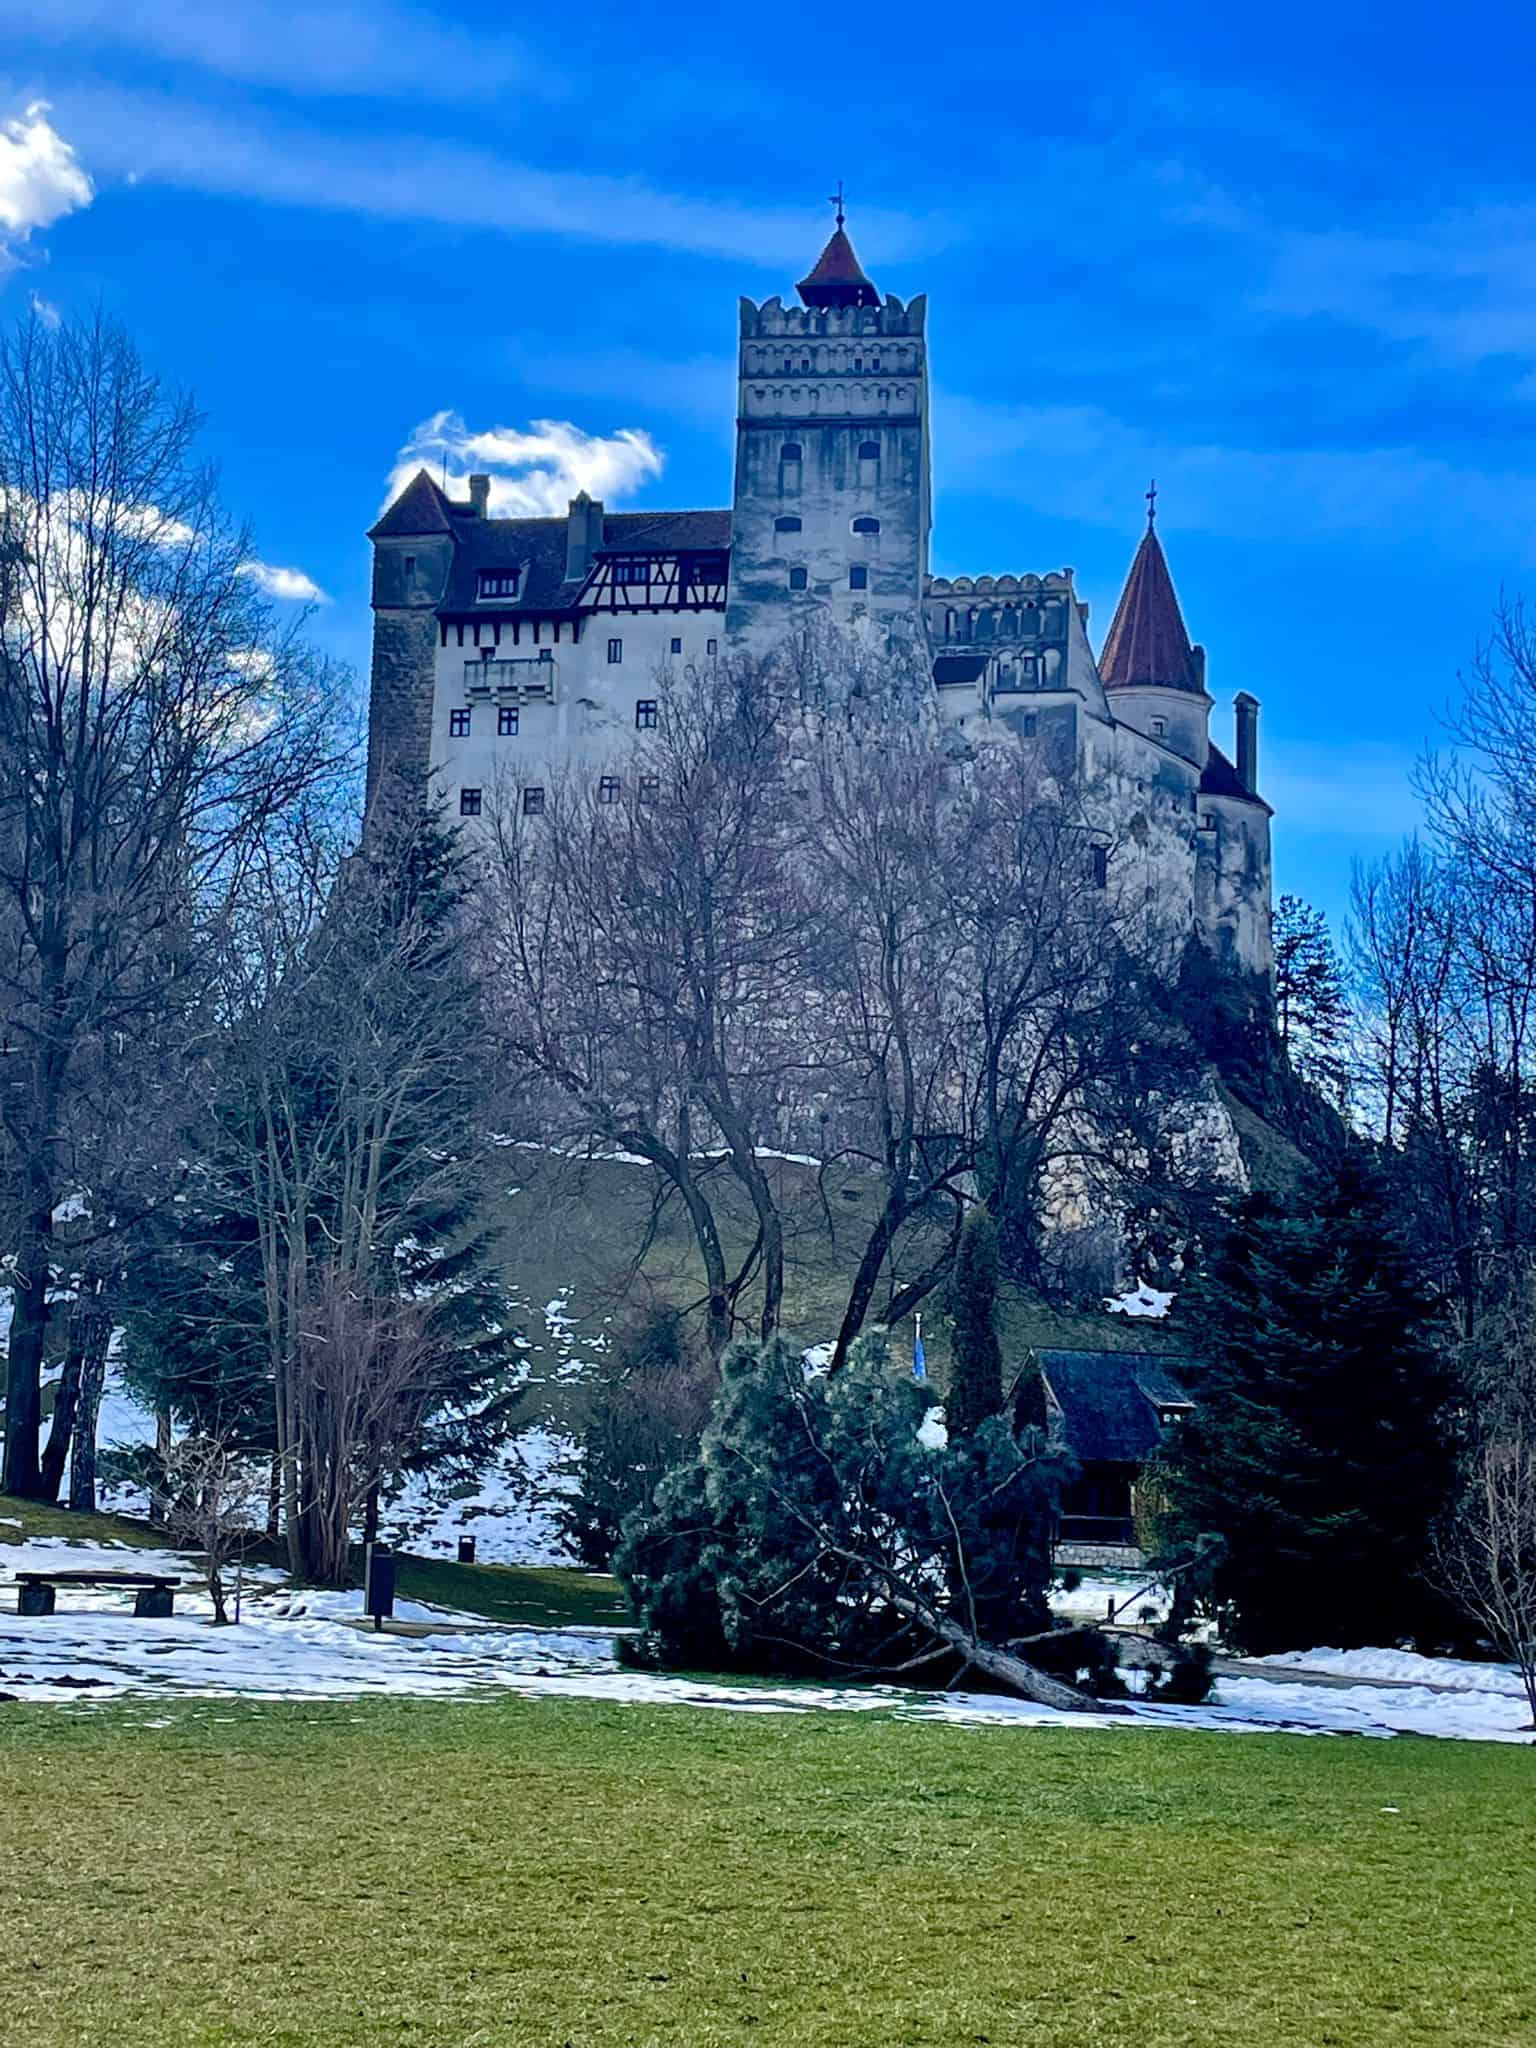 Bran Castle (Dracula's Castle) in Romania with snow and grass in the foreground and dark blue skies